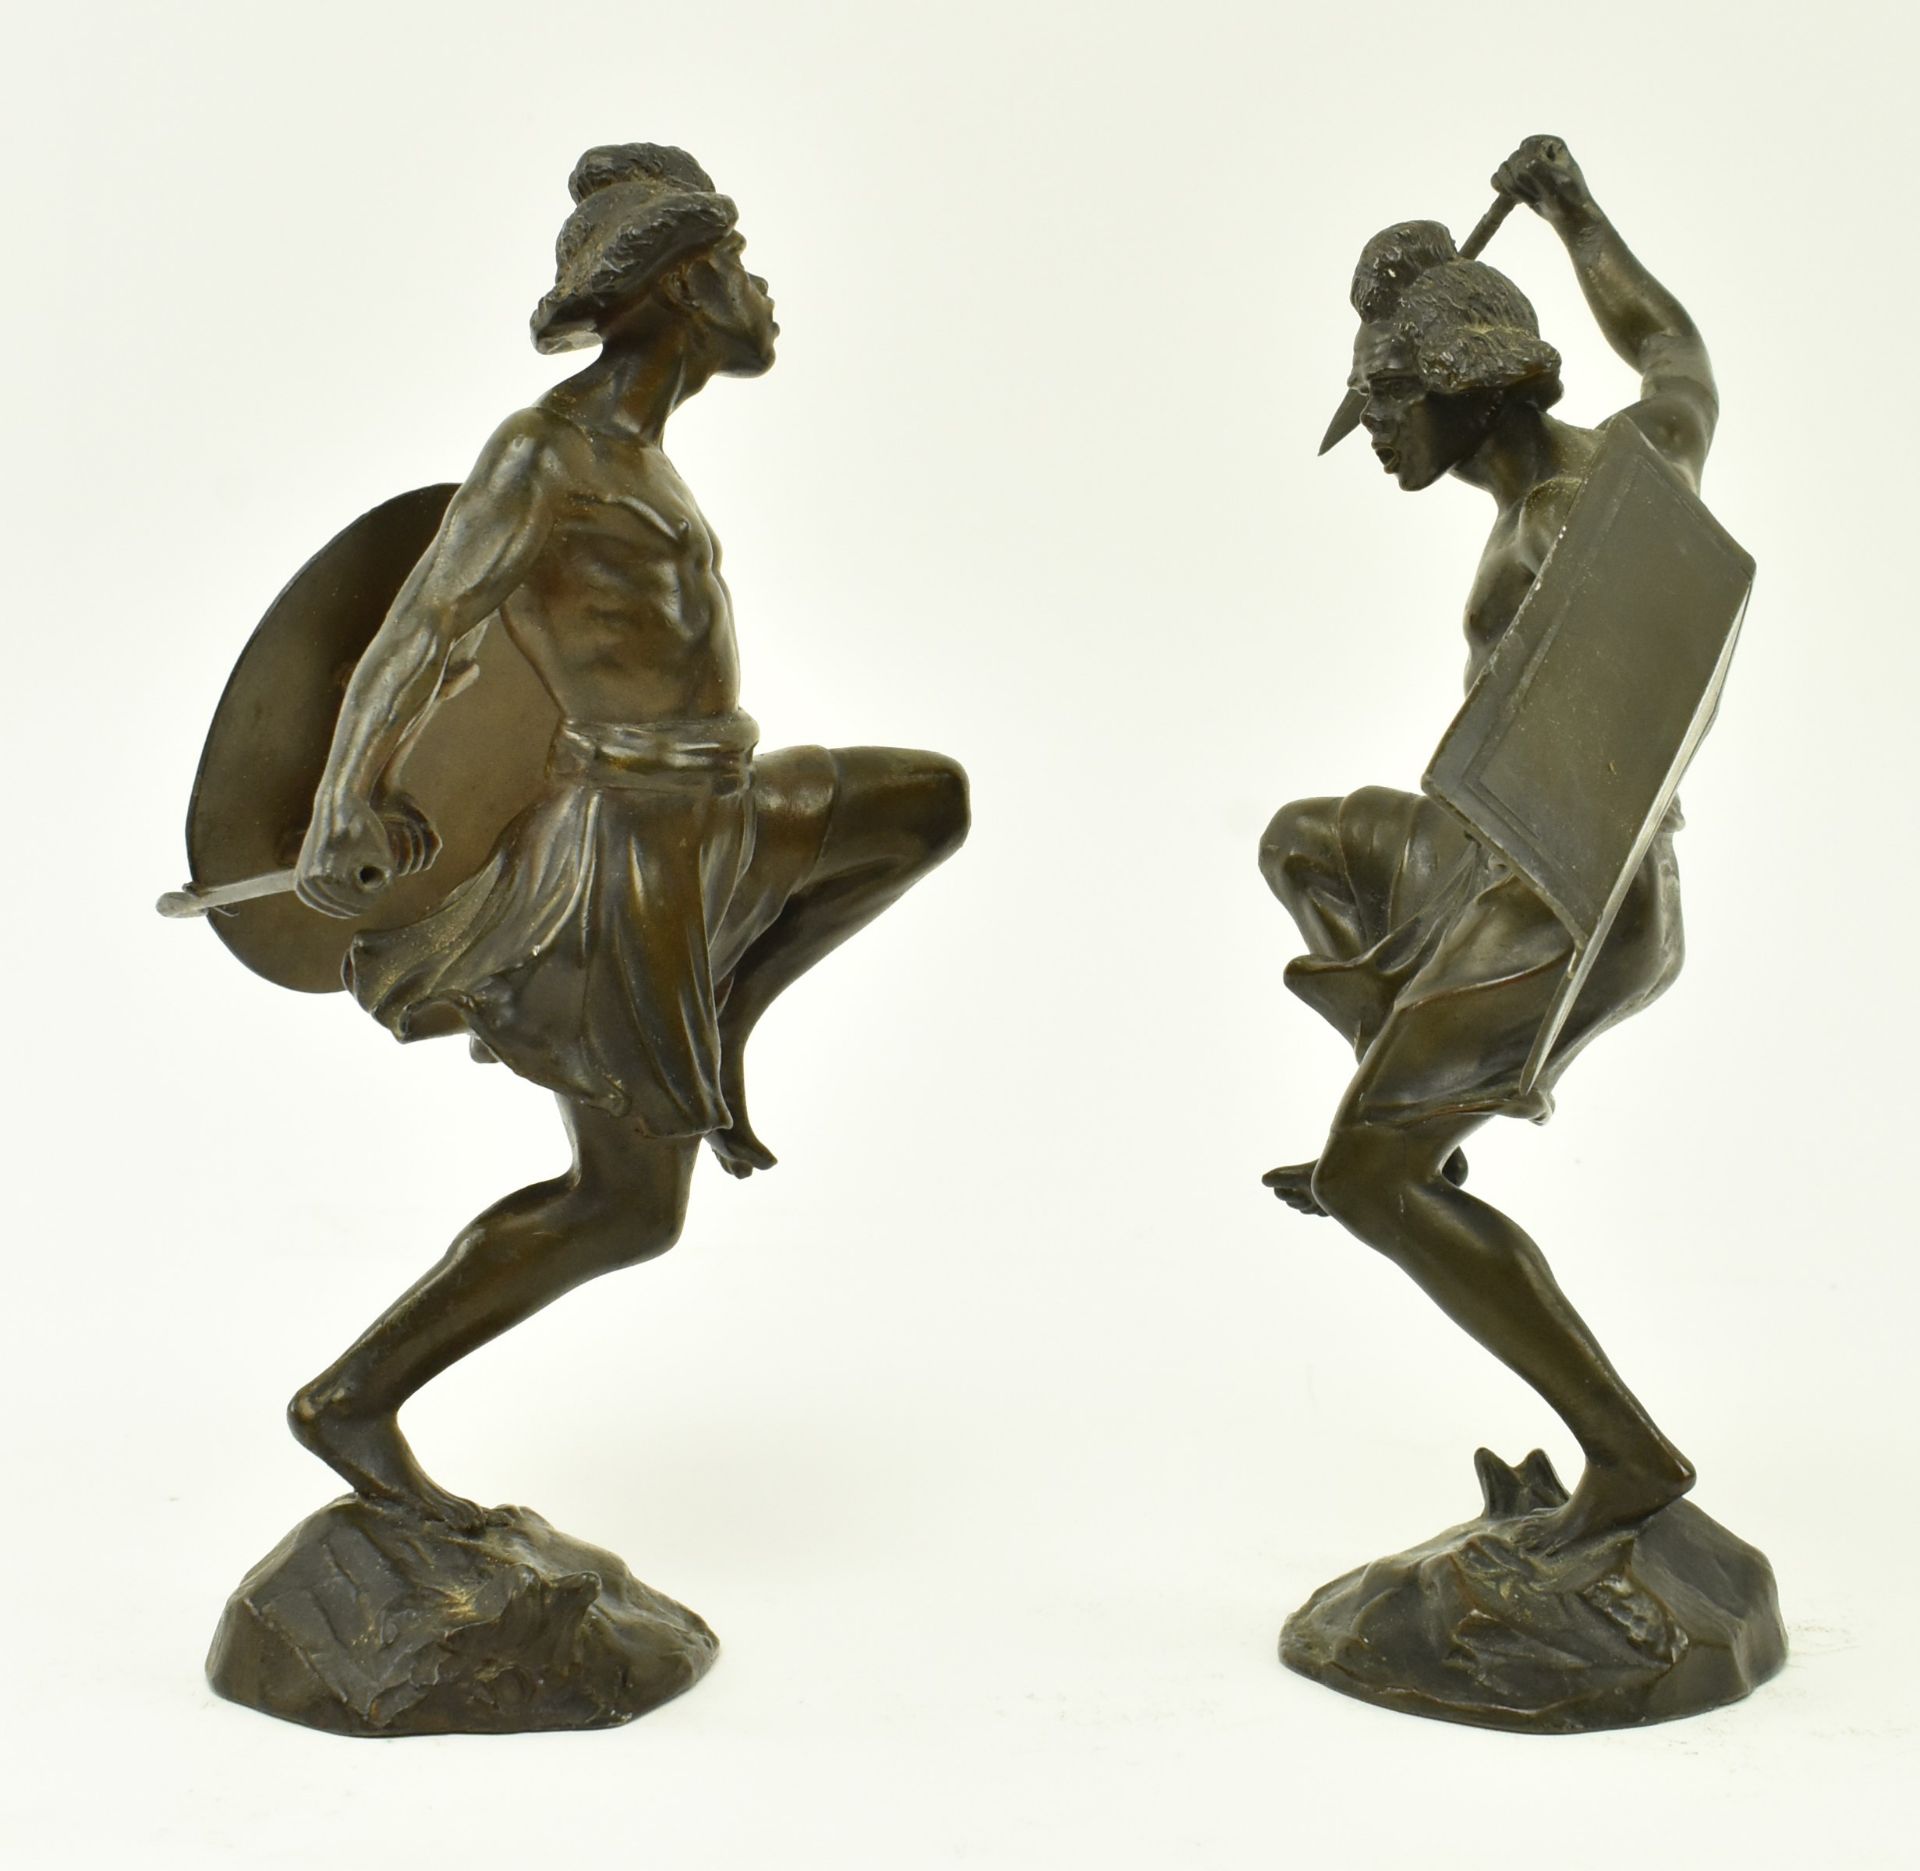 PAIR OF SOUTH AMERICAN 19TH CENTURY BRONZE WARRIORS FIGURES - Image 2 of 5